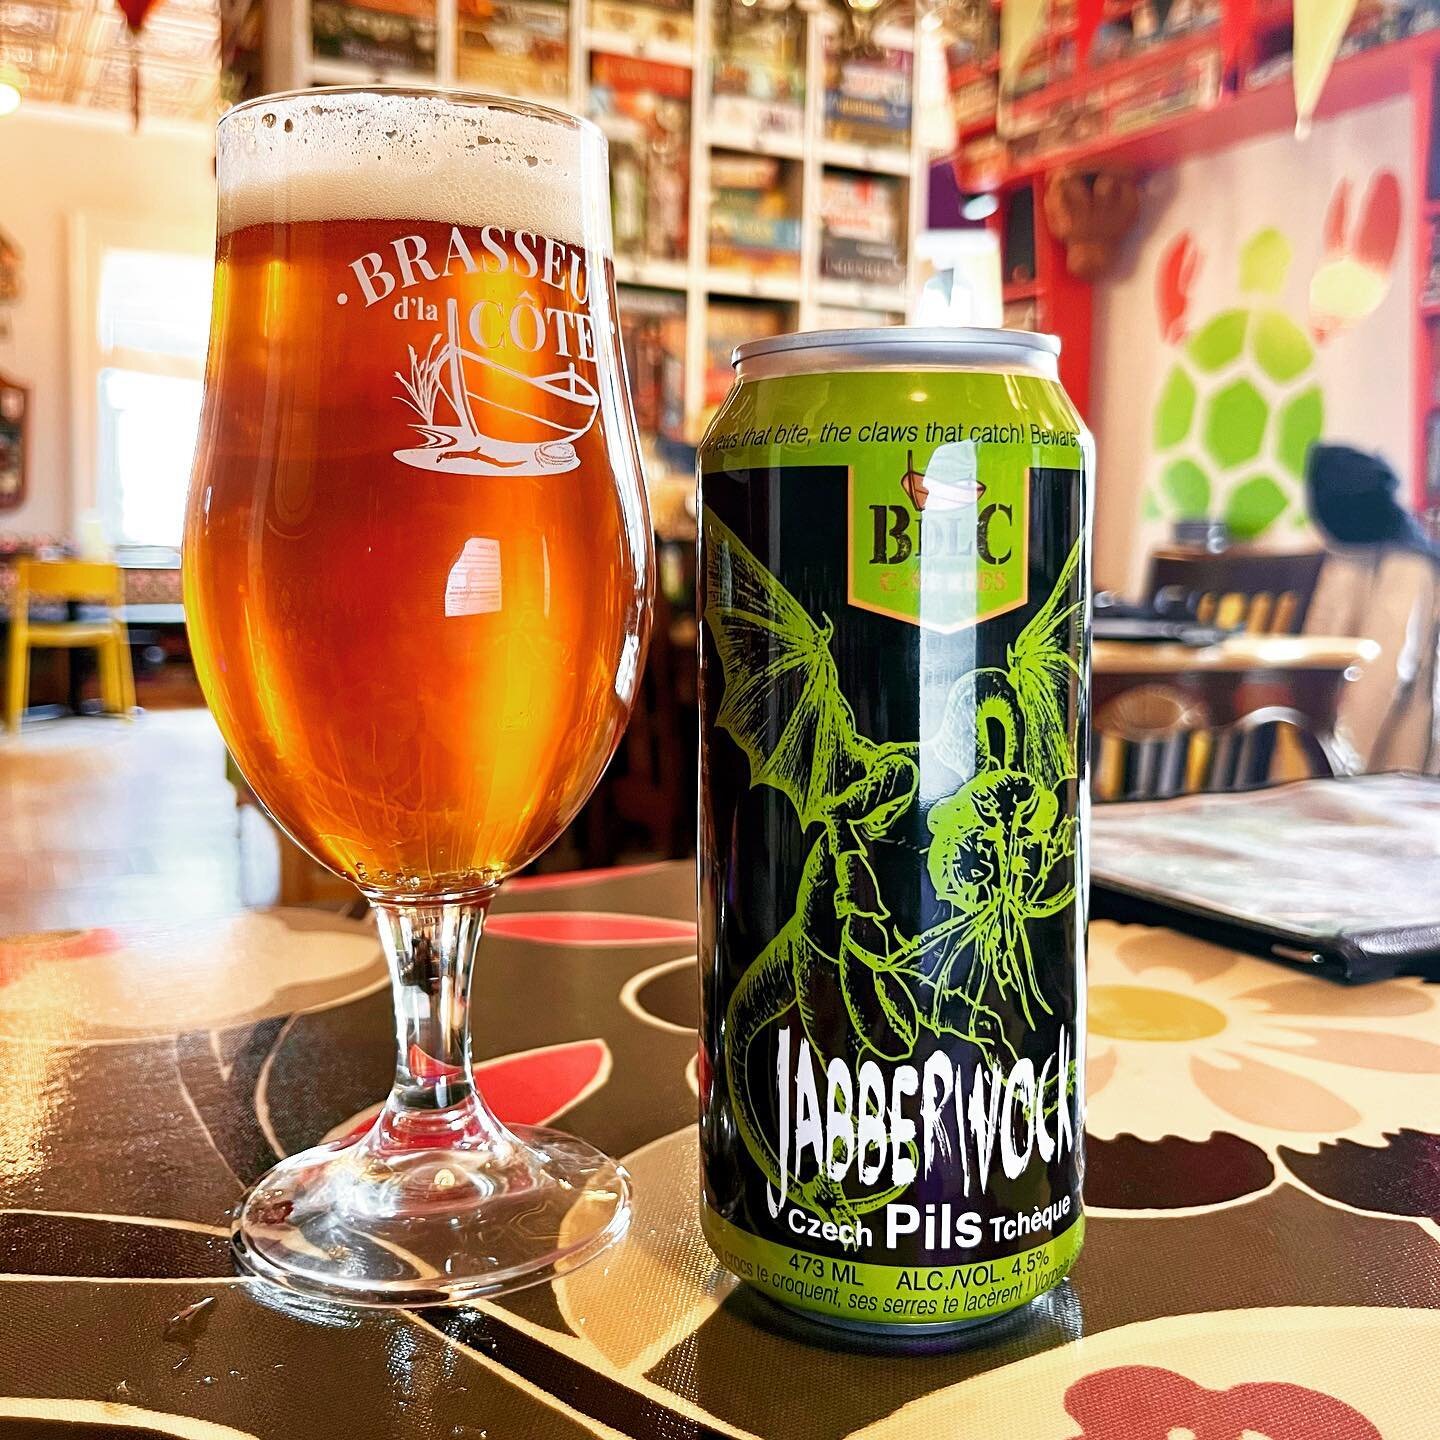 BOOZE NEWS!!! Our @brasseuxdlacote &lsquo;s Moque-Tortue-themed beer has been approved for distribution throughout the Province this summer!!! 

Thirsty now? Stop by Le Moque-Tortue to quench your thirst!
&mdash;&mdash;&mdash;&mdash;&mdash;
Notre #Ja